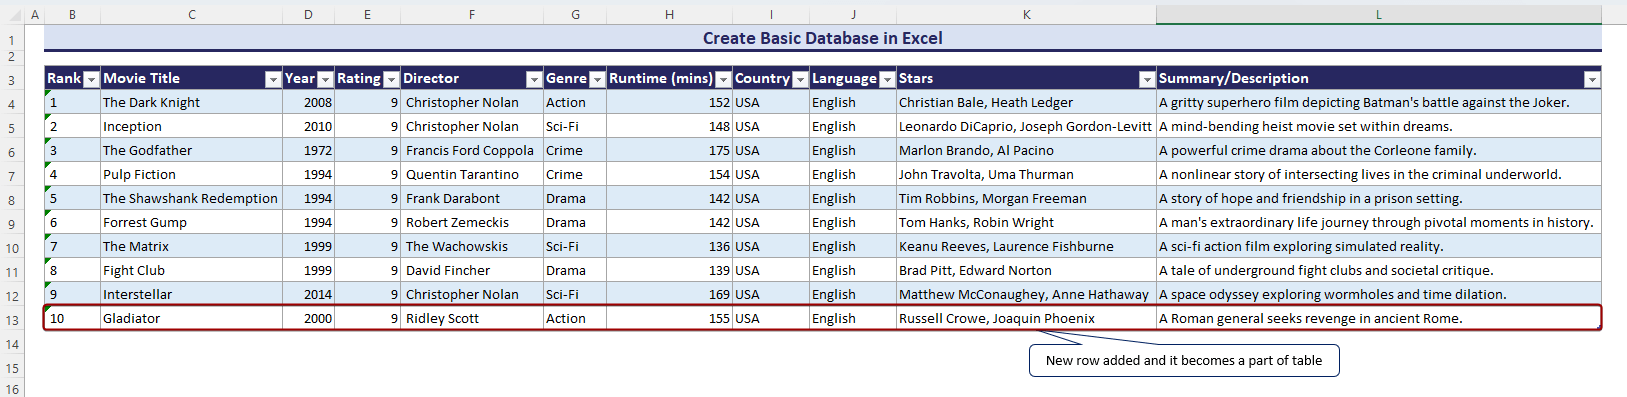 Adding a new row into the Excel database